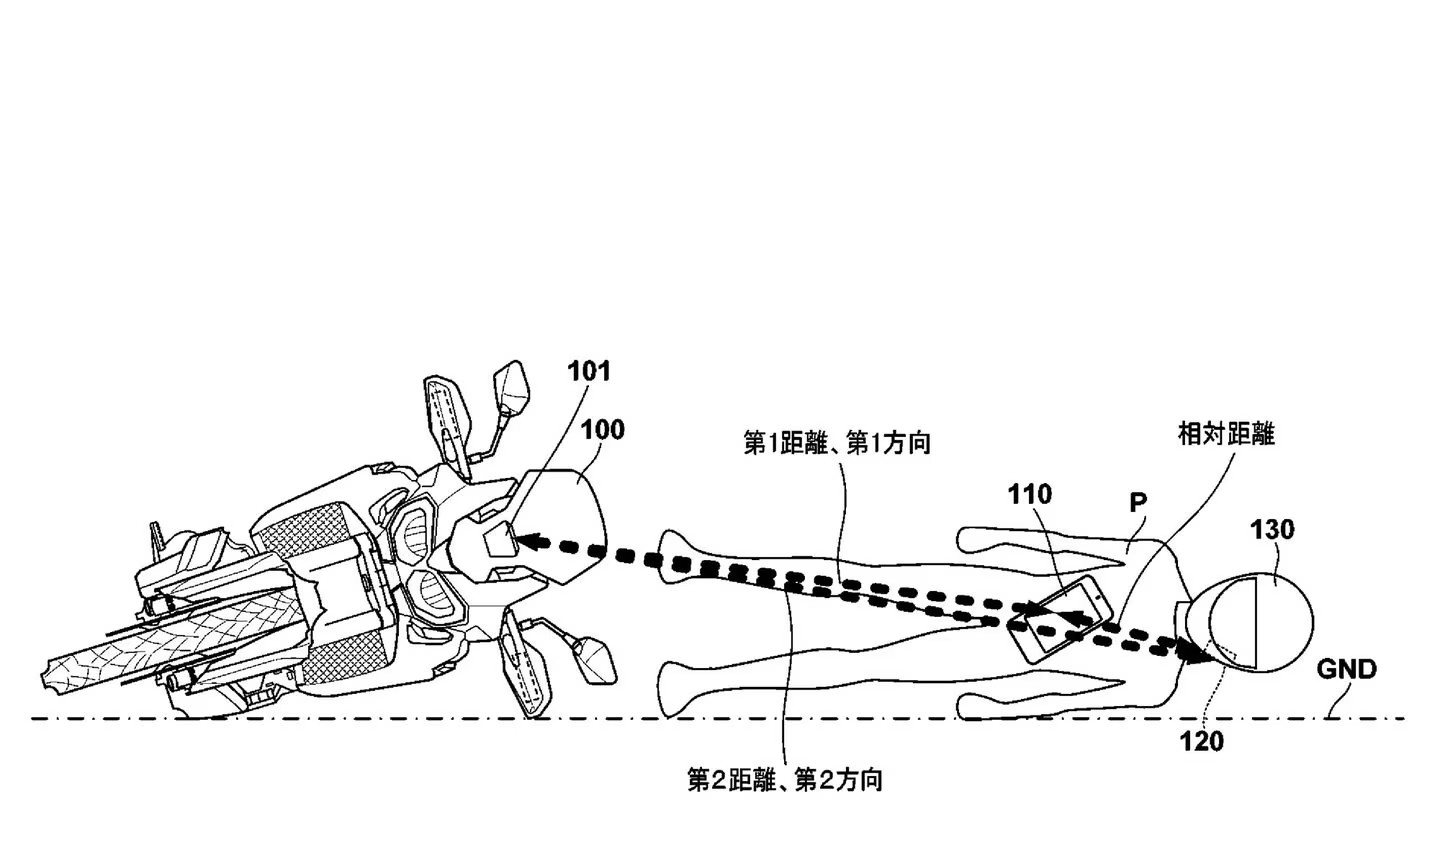 Emergency situation from Honda's patent application